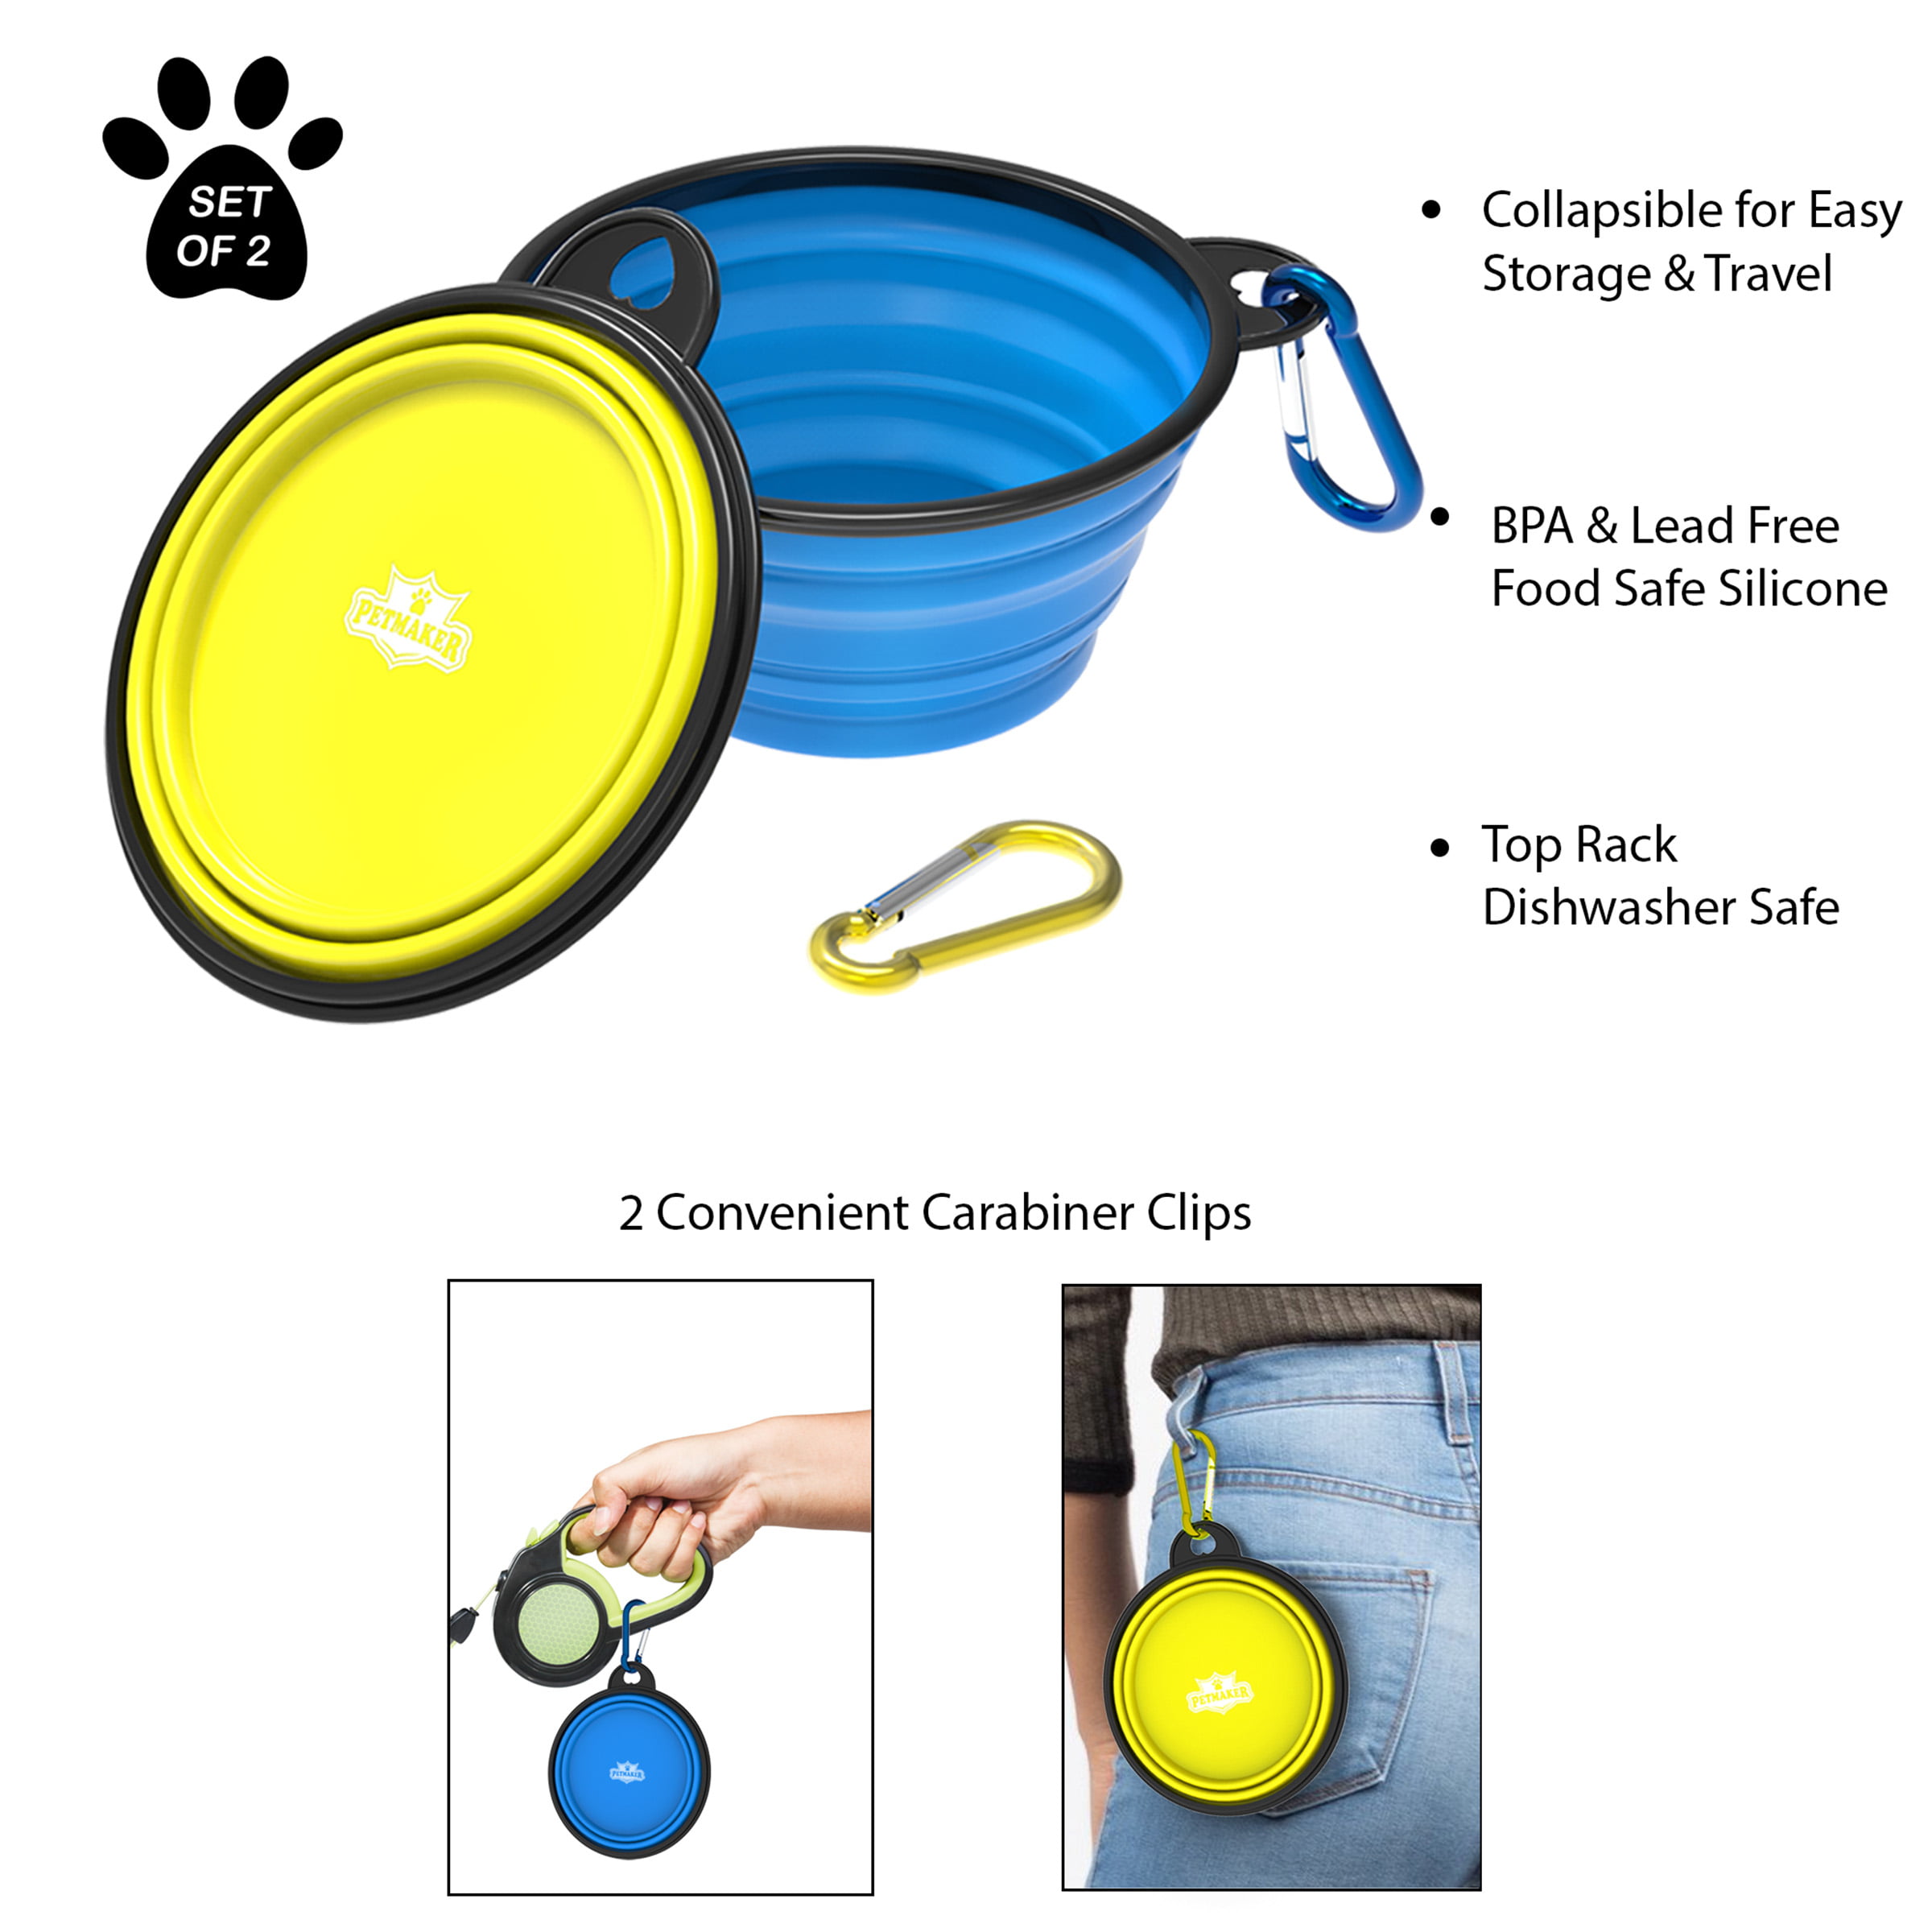 Collapsible Travel Bowls List (Tan)